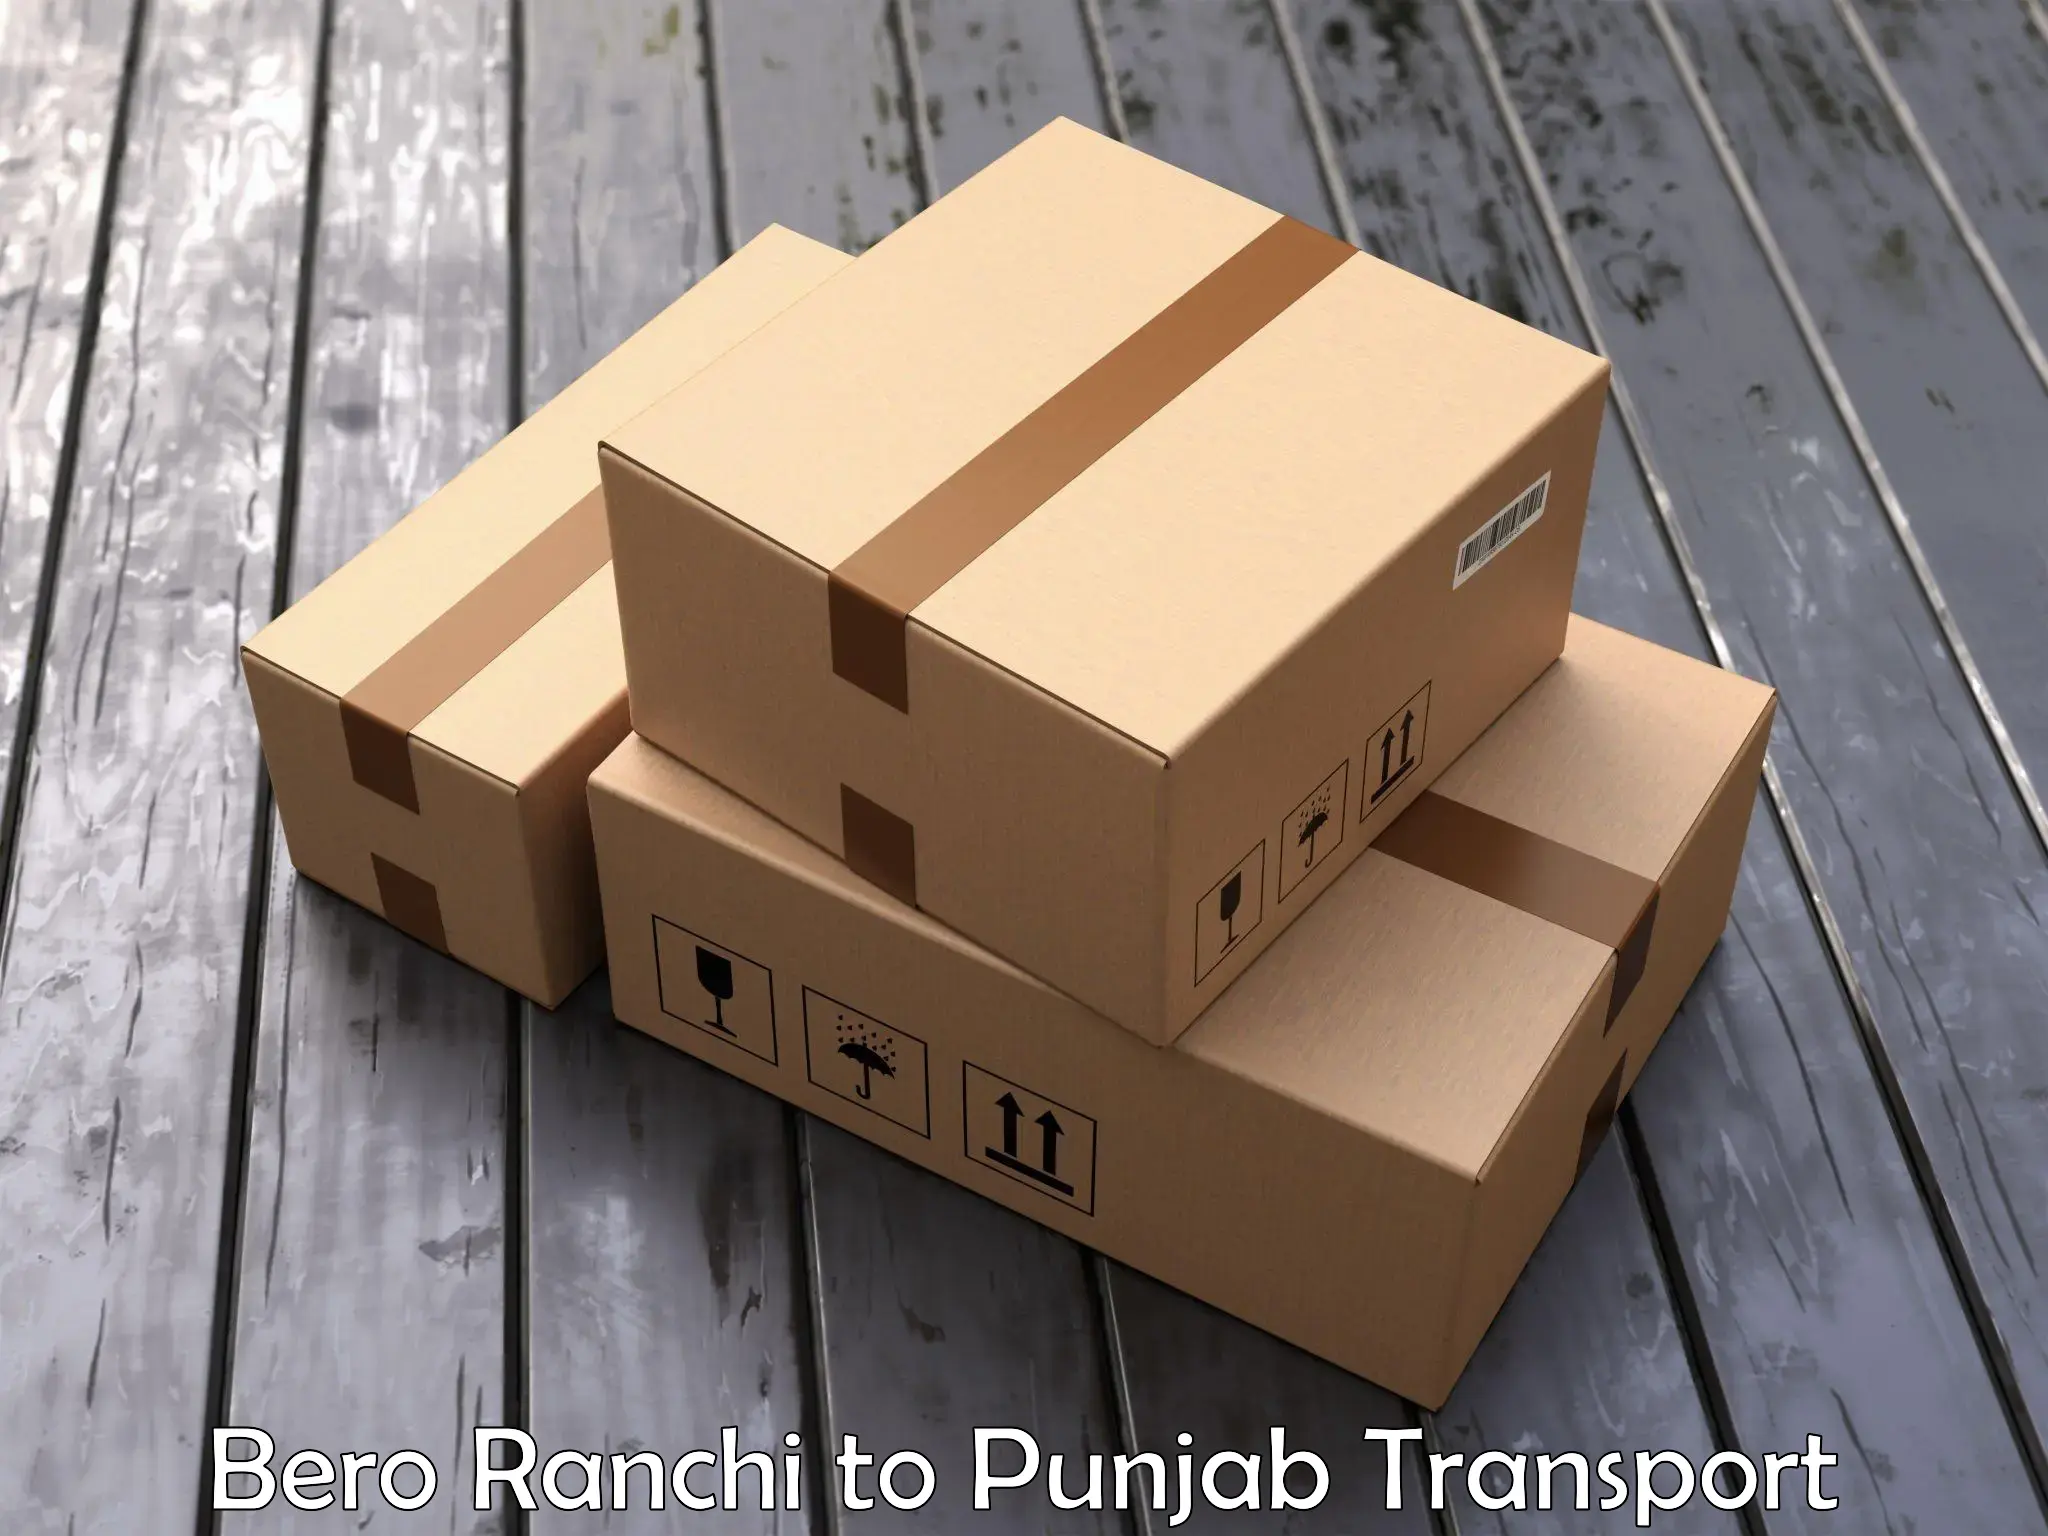 Air freight transport services Bero Ranchi to Khanna